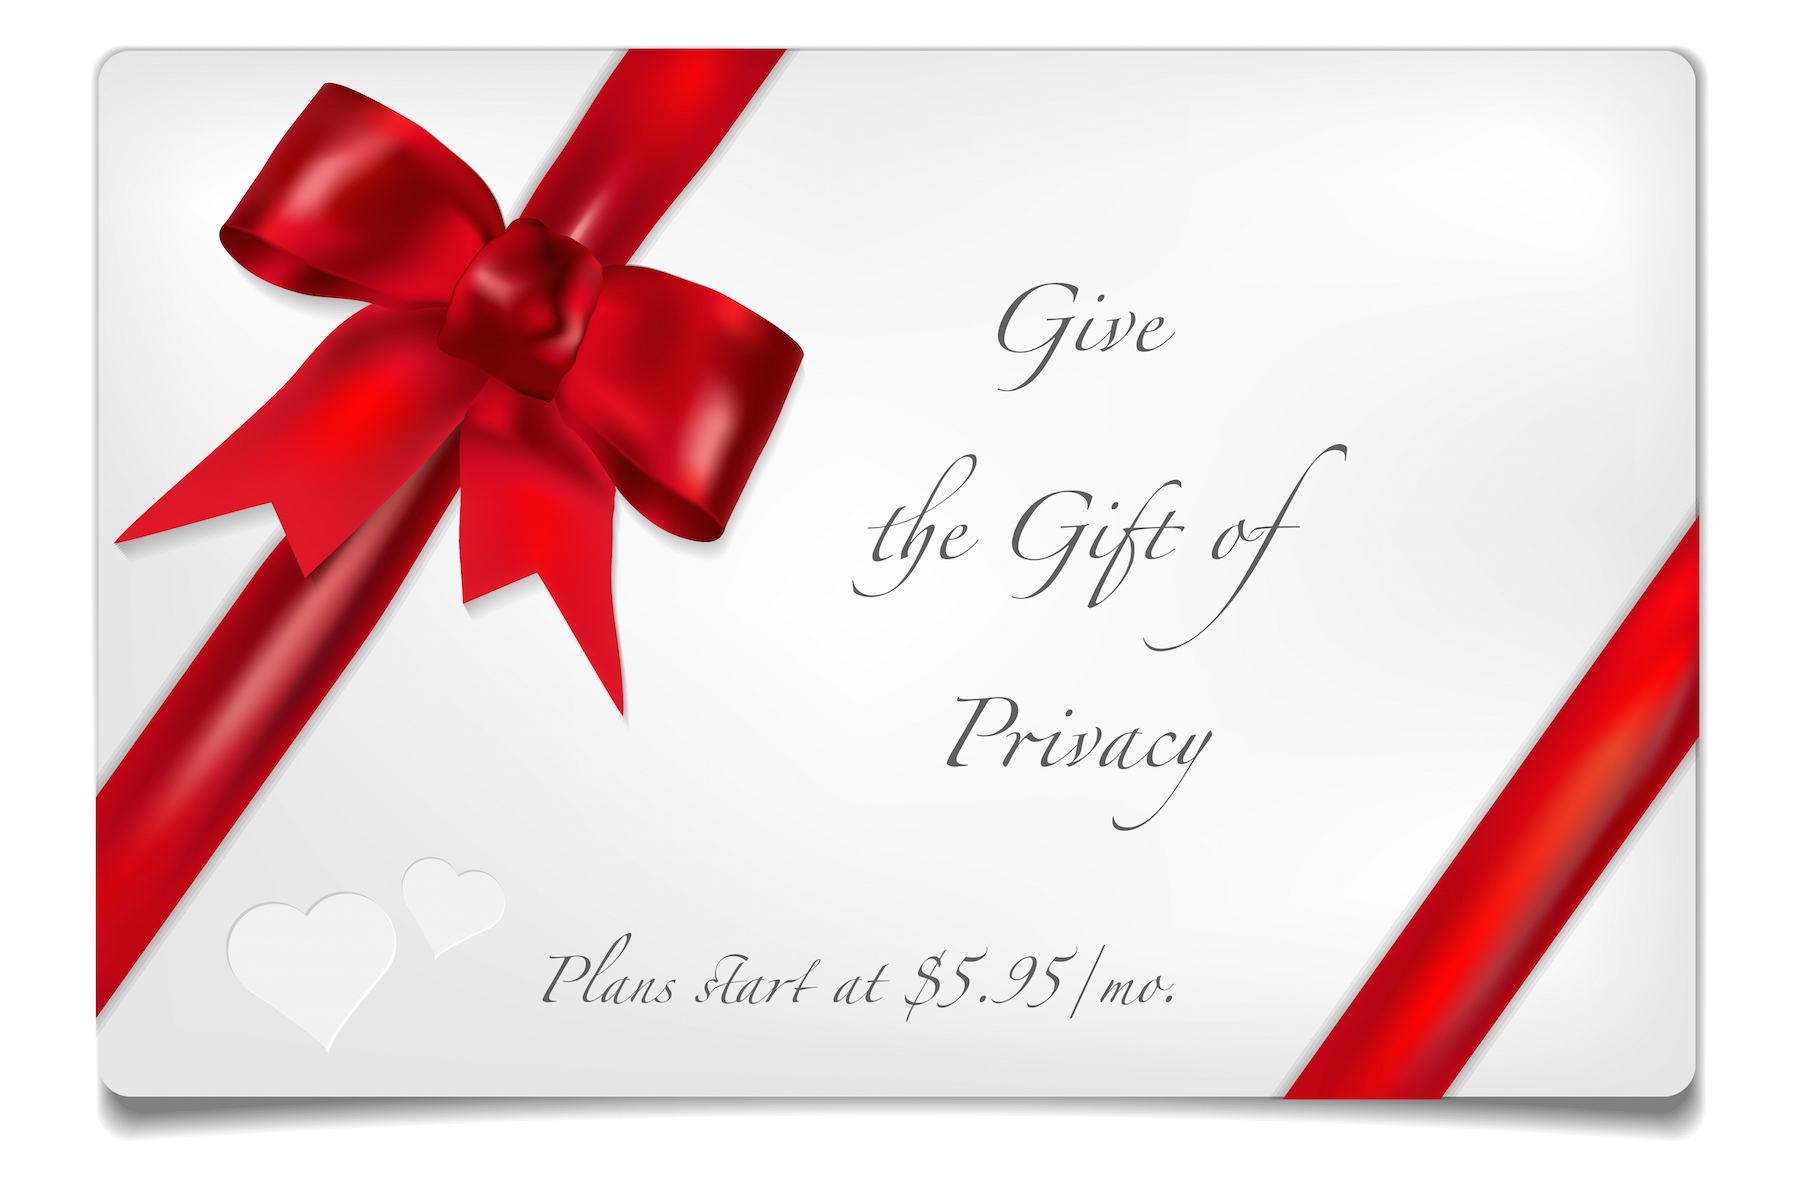 The Gift of Privacy